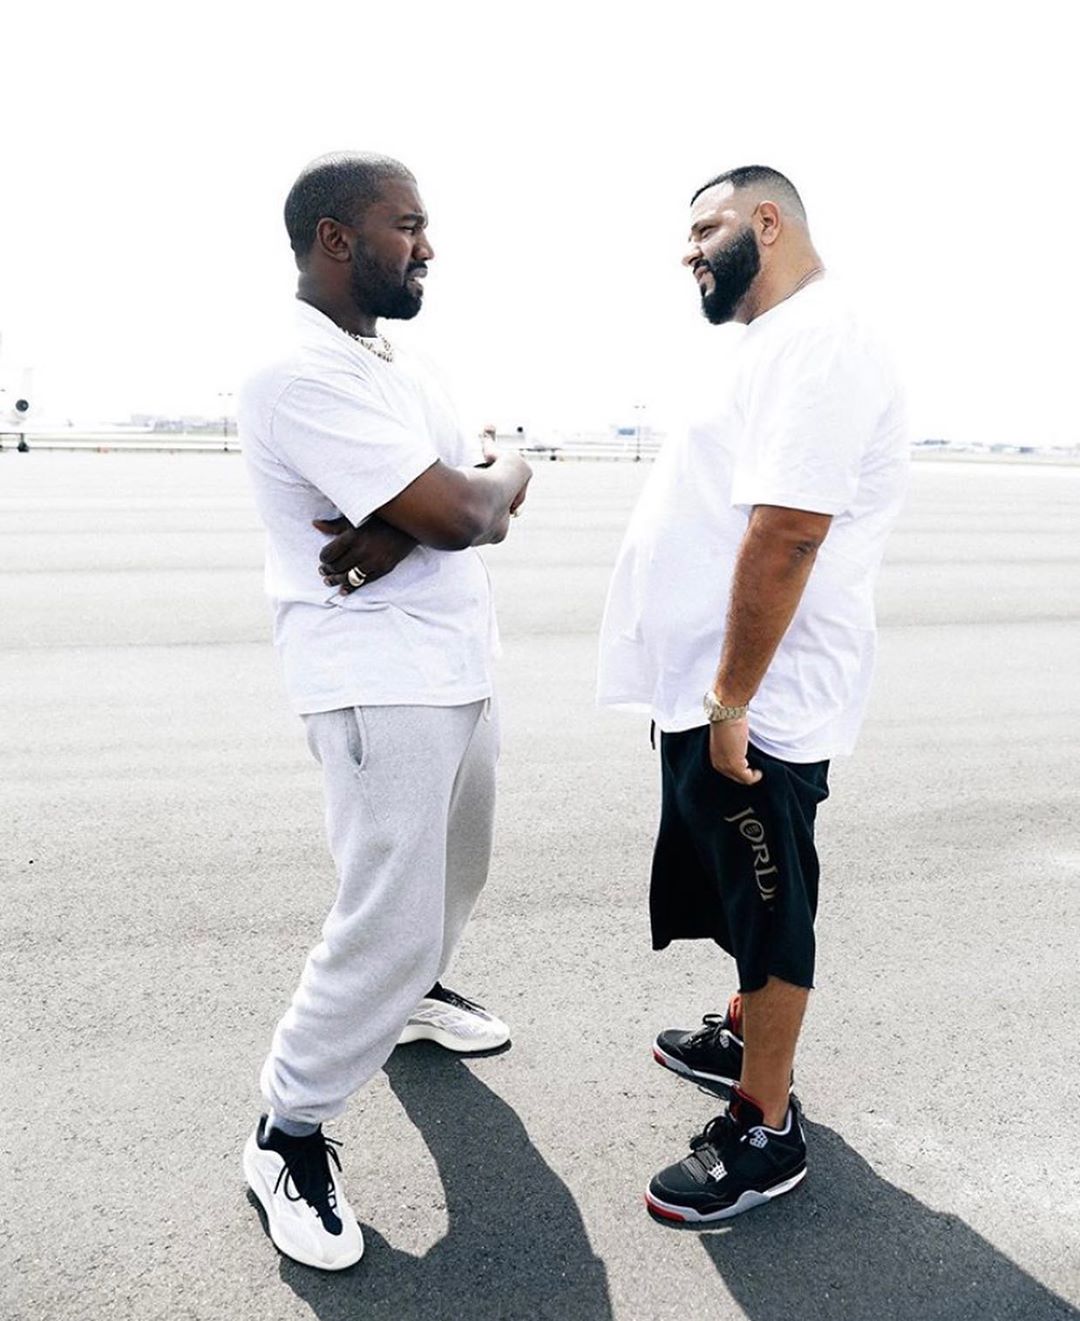 SPOTTED: KANYE WEST GIFTS DJ KHALED YZY BSKT SNEAKERS ON THE TARMAC